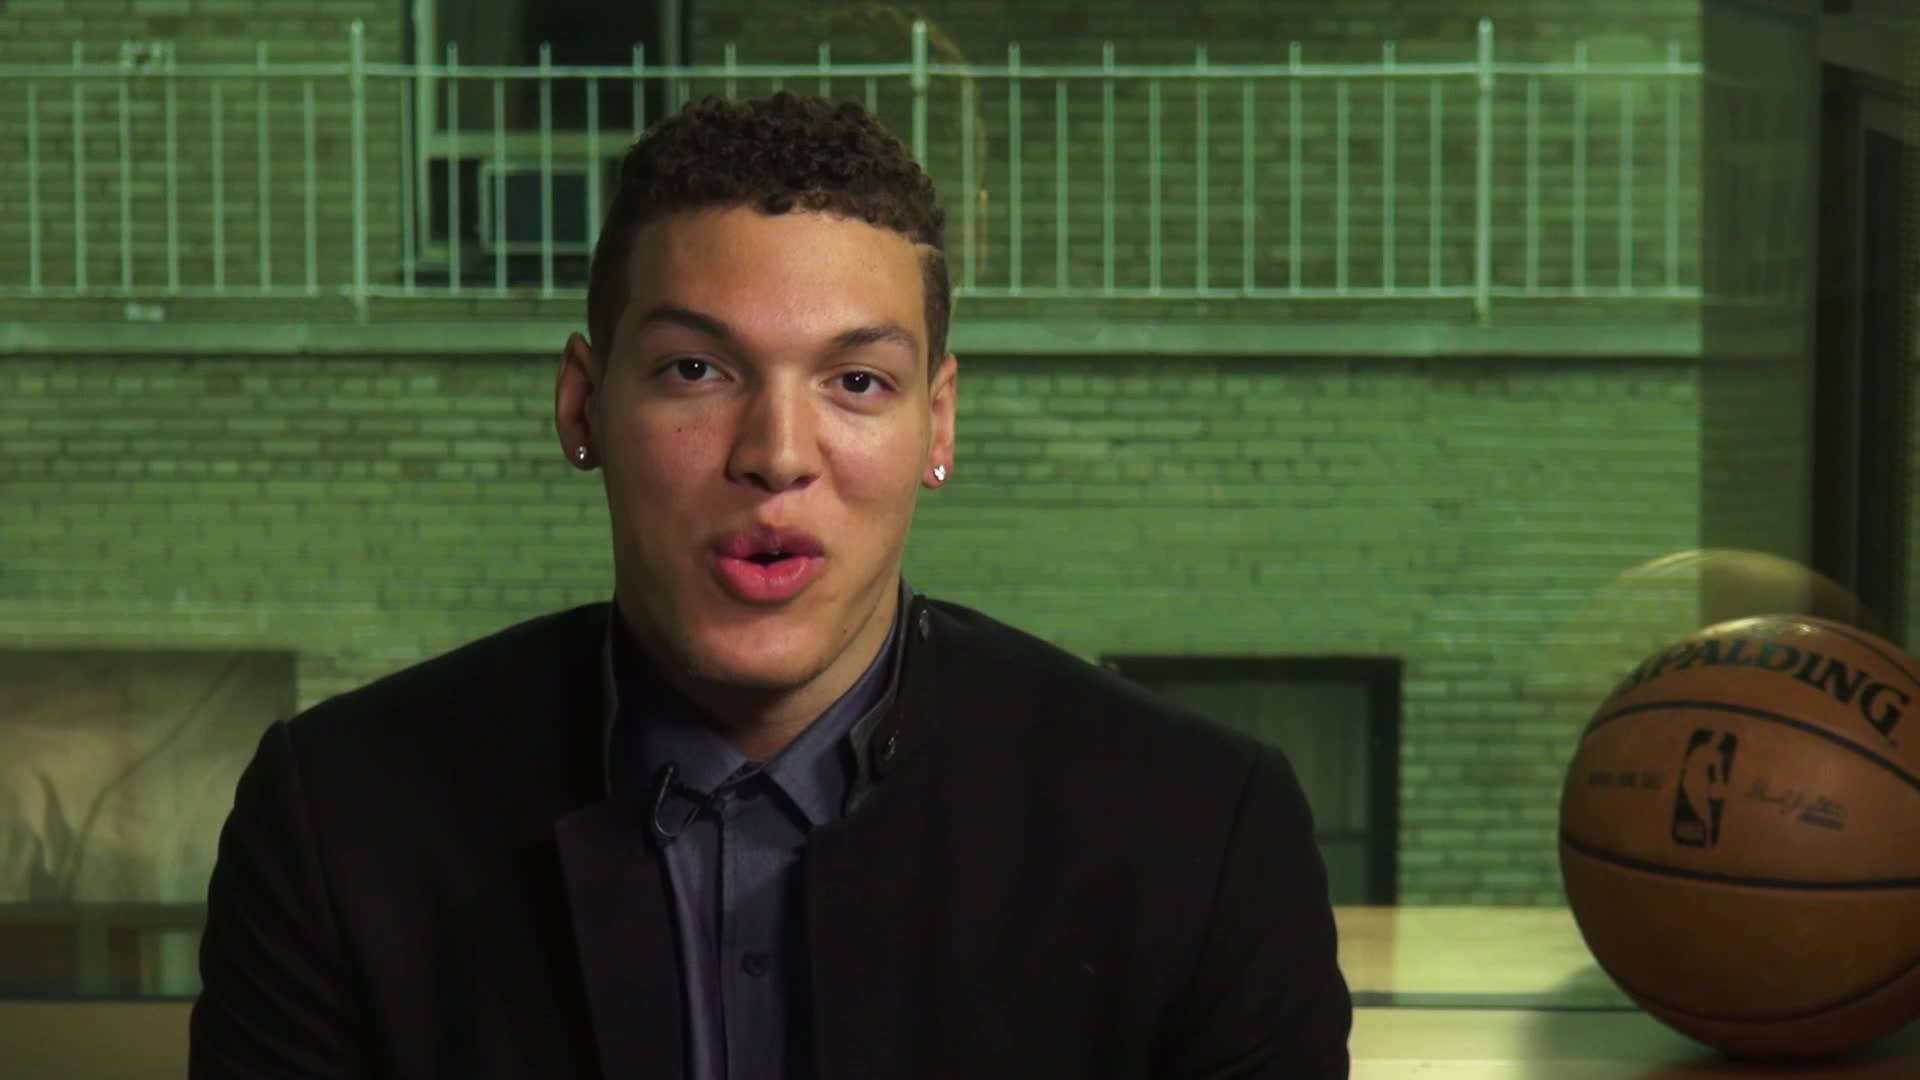 Magnificent Aaron Gordon In Action On Basketball Court Background